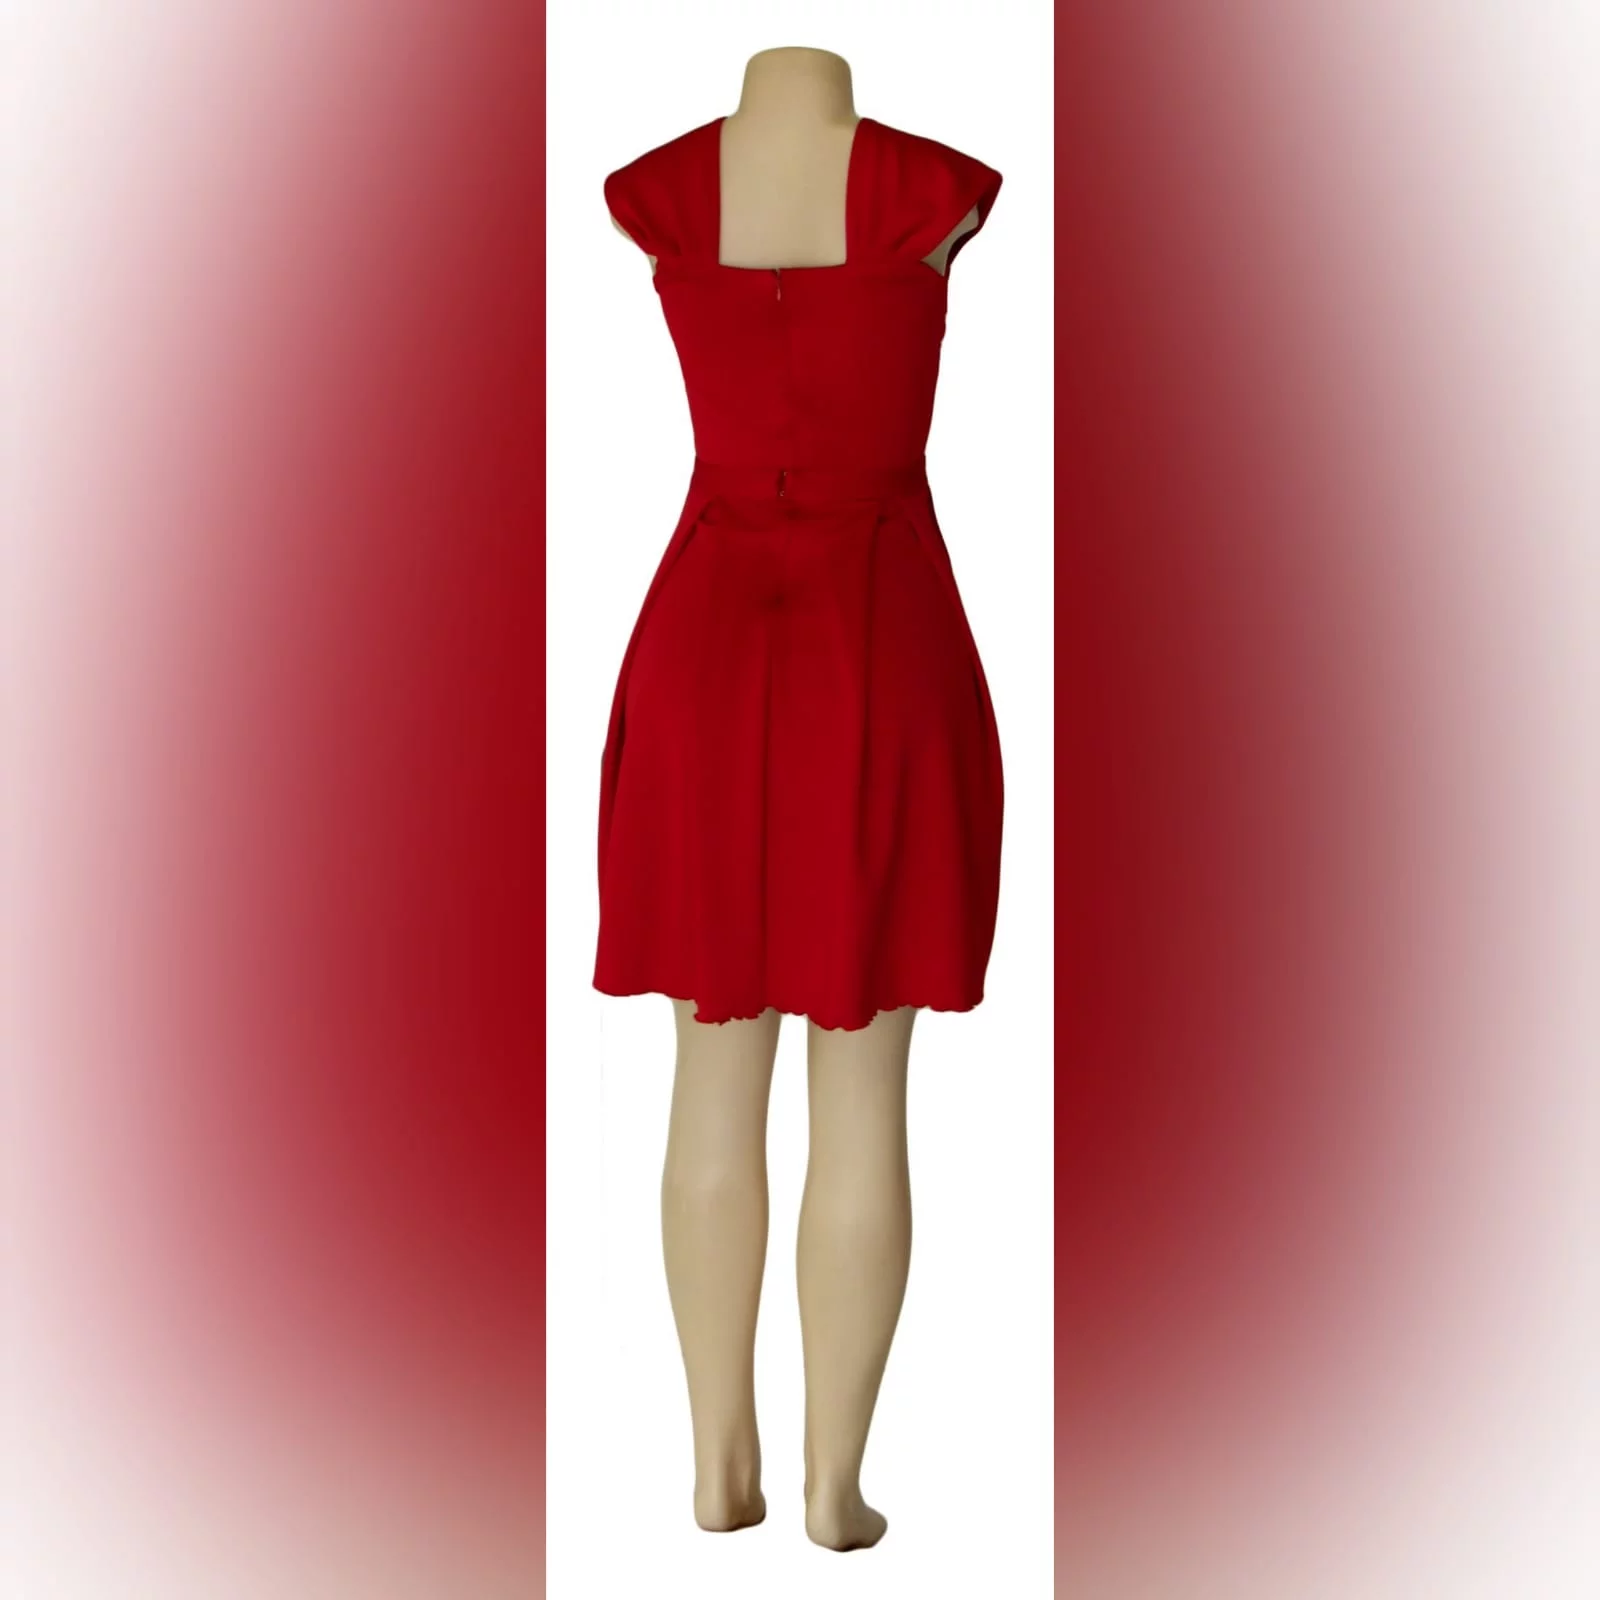 Short red pleated evening dress 3 short red pleated evening dress with a pleated sweetheart neckline and a detachable belt with bow detail